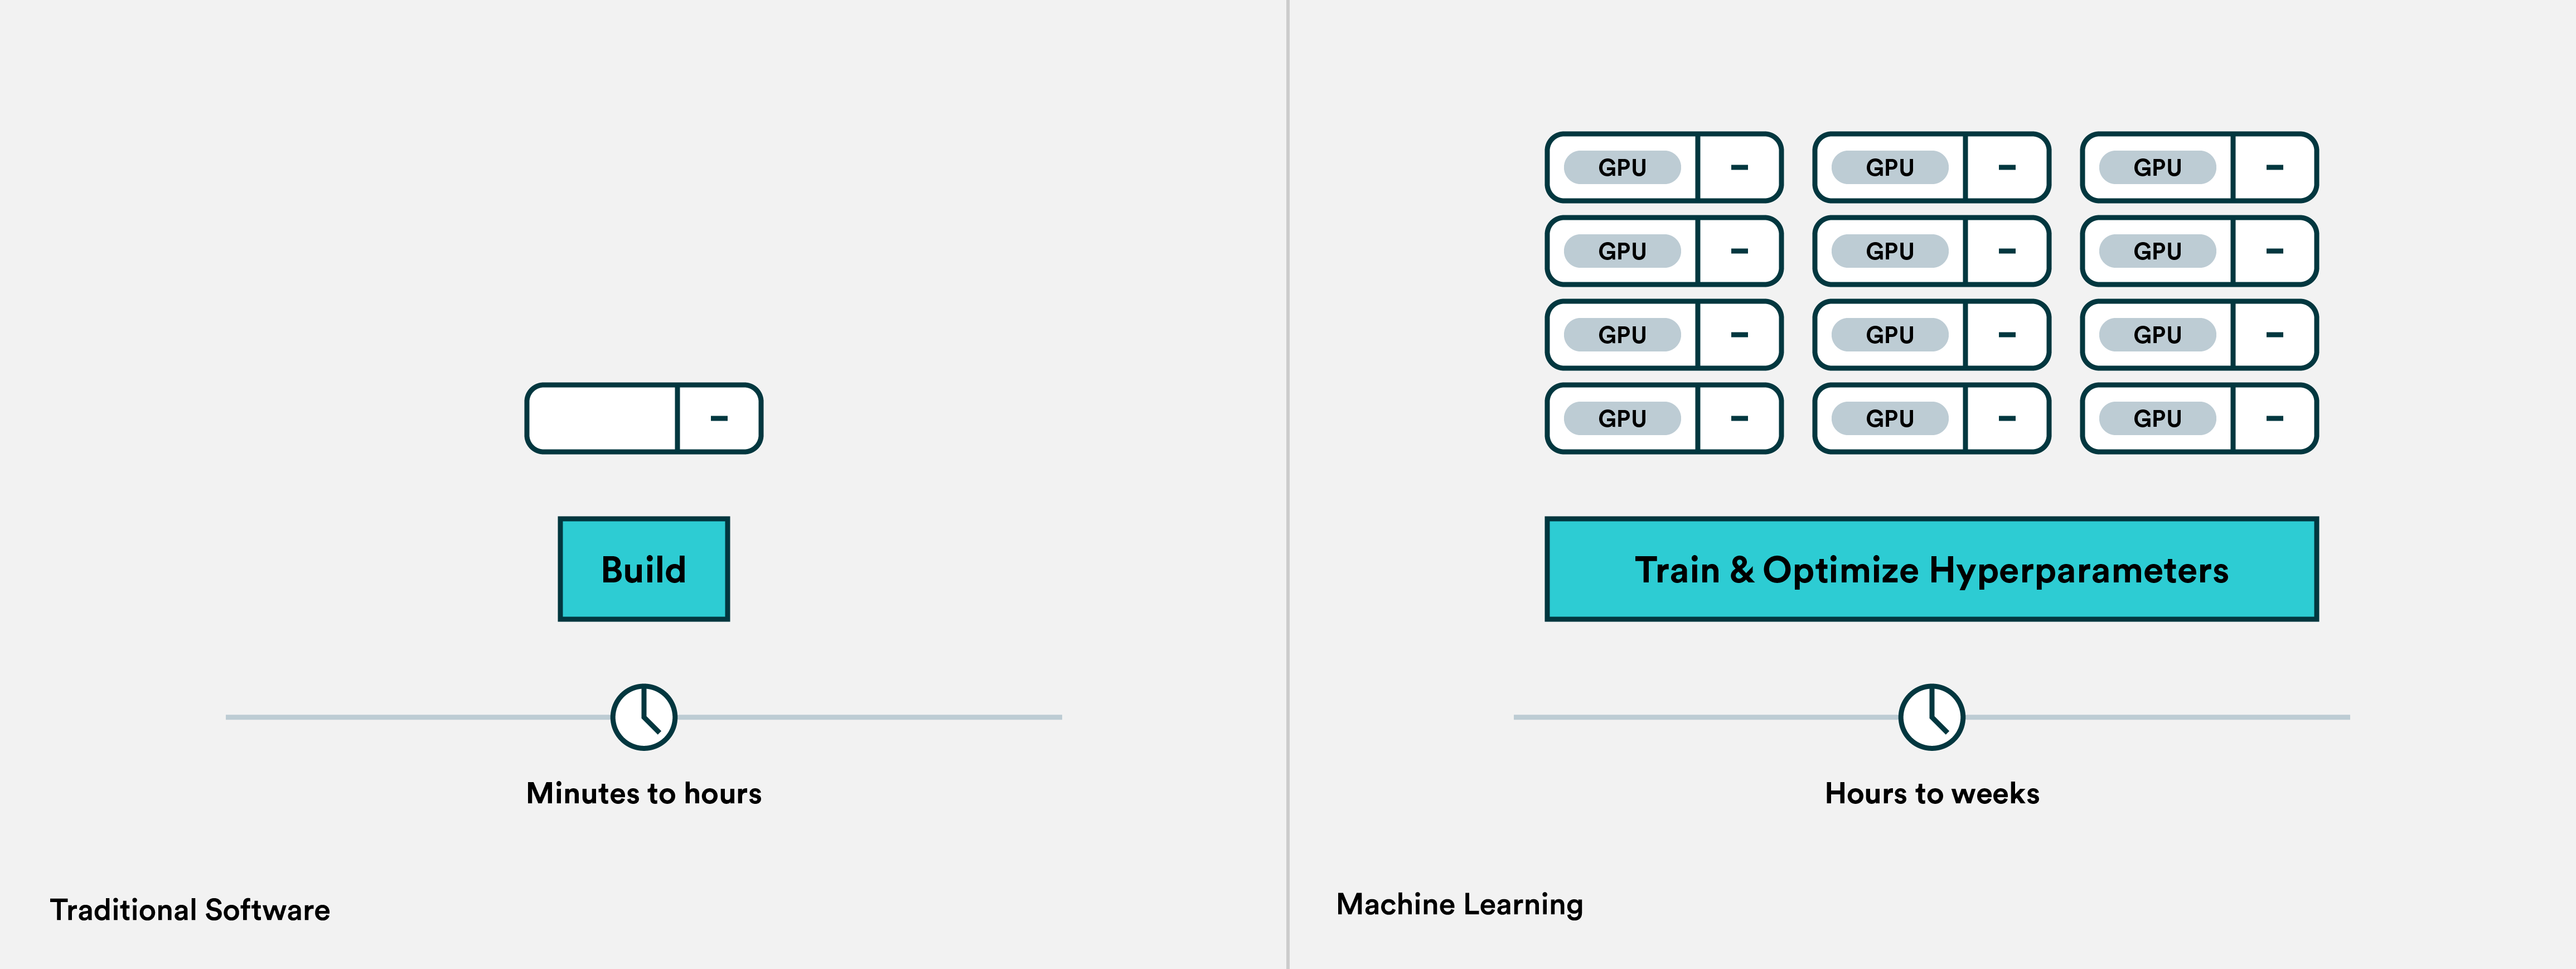 How software and machine learning pipelines are different? A comparison of building time for traditional software and machine learning projects.